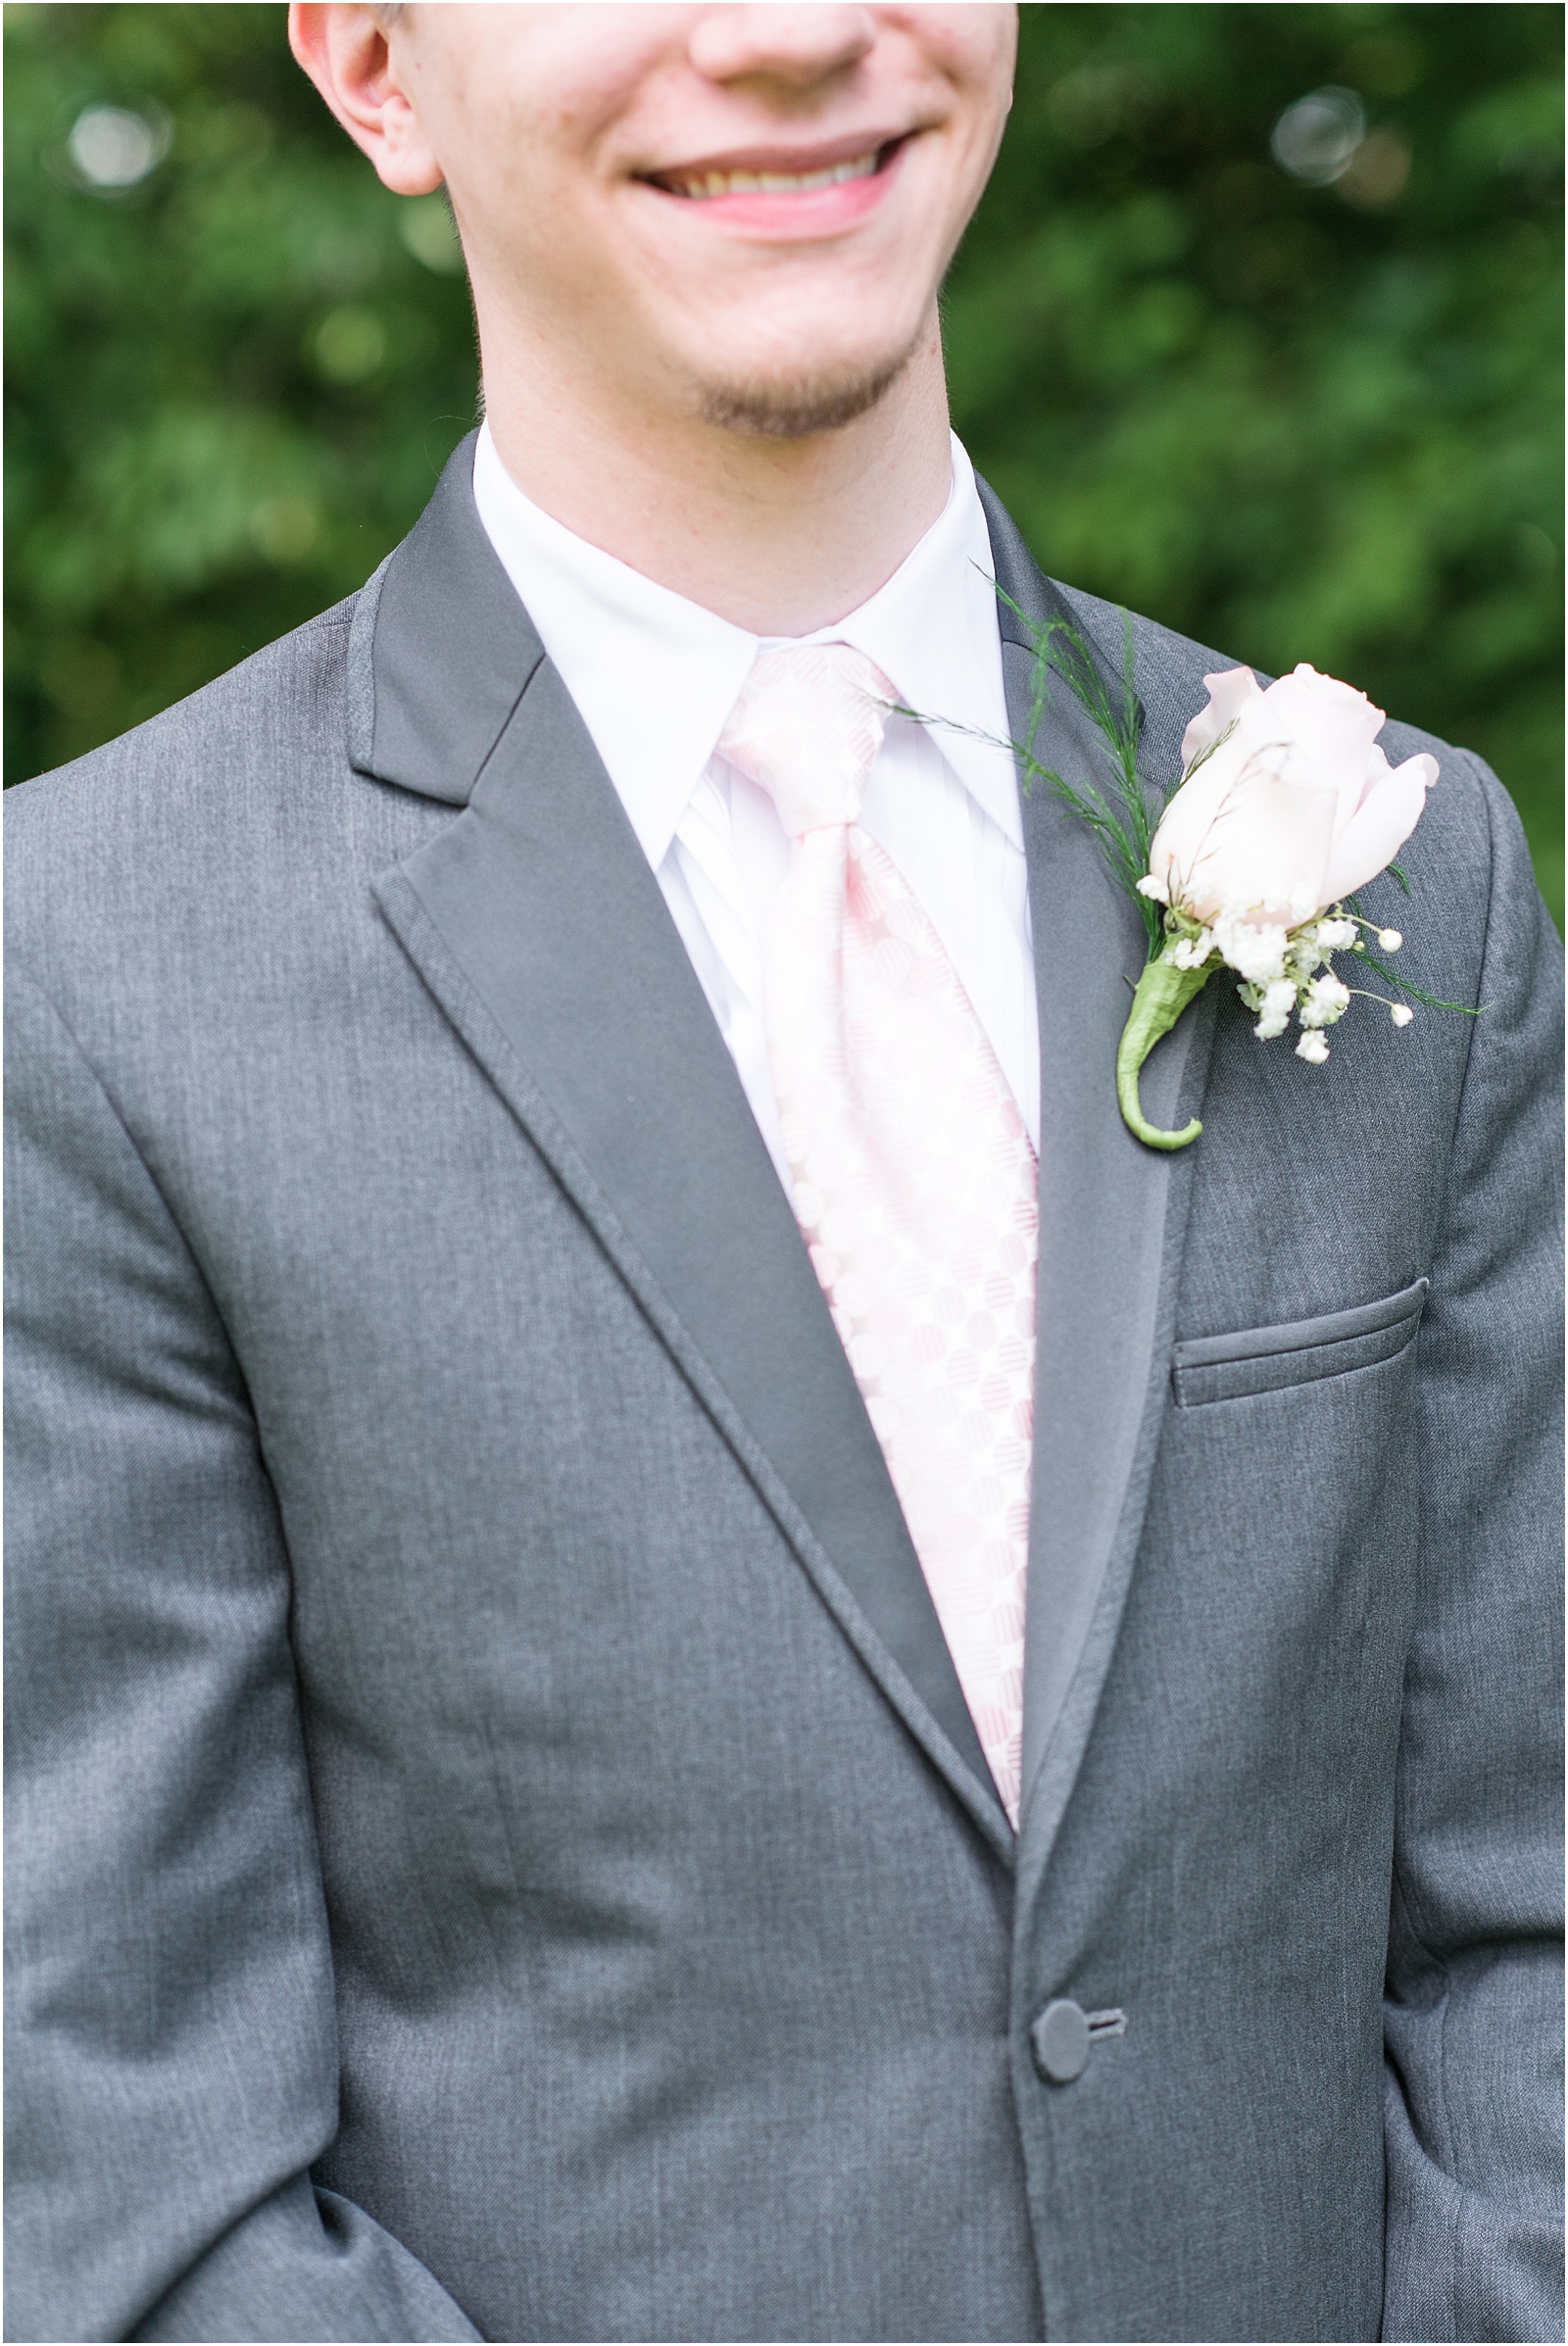 groom wearing grey suit with pink tie and pink rose boutenerrie at City Lake Baptist Church